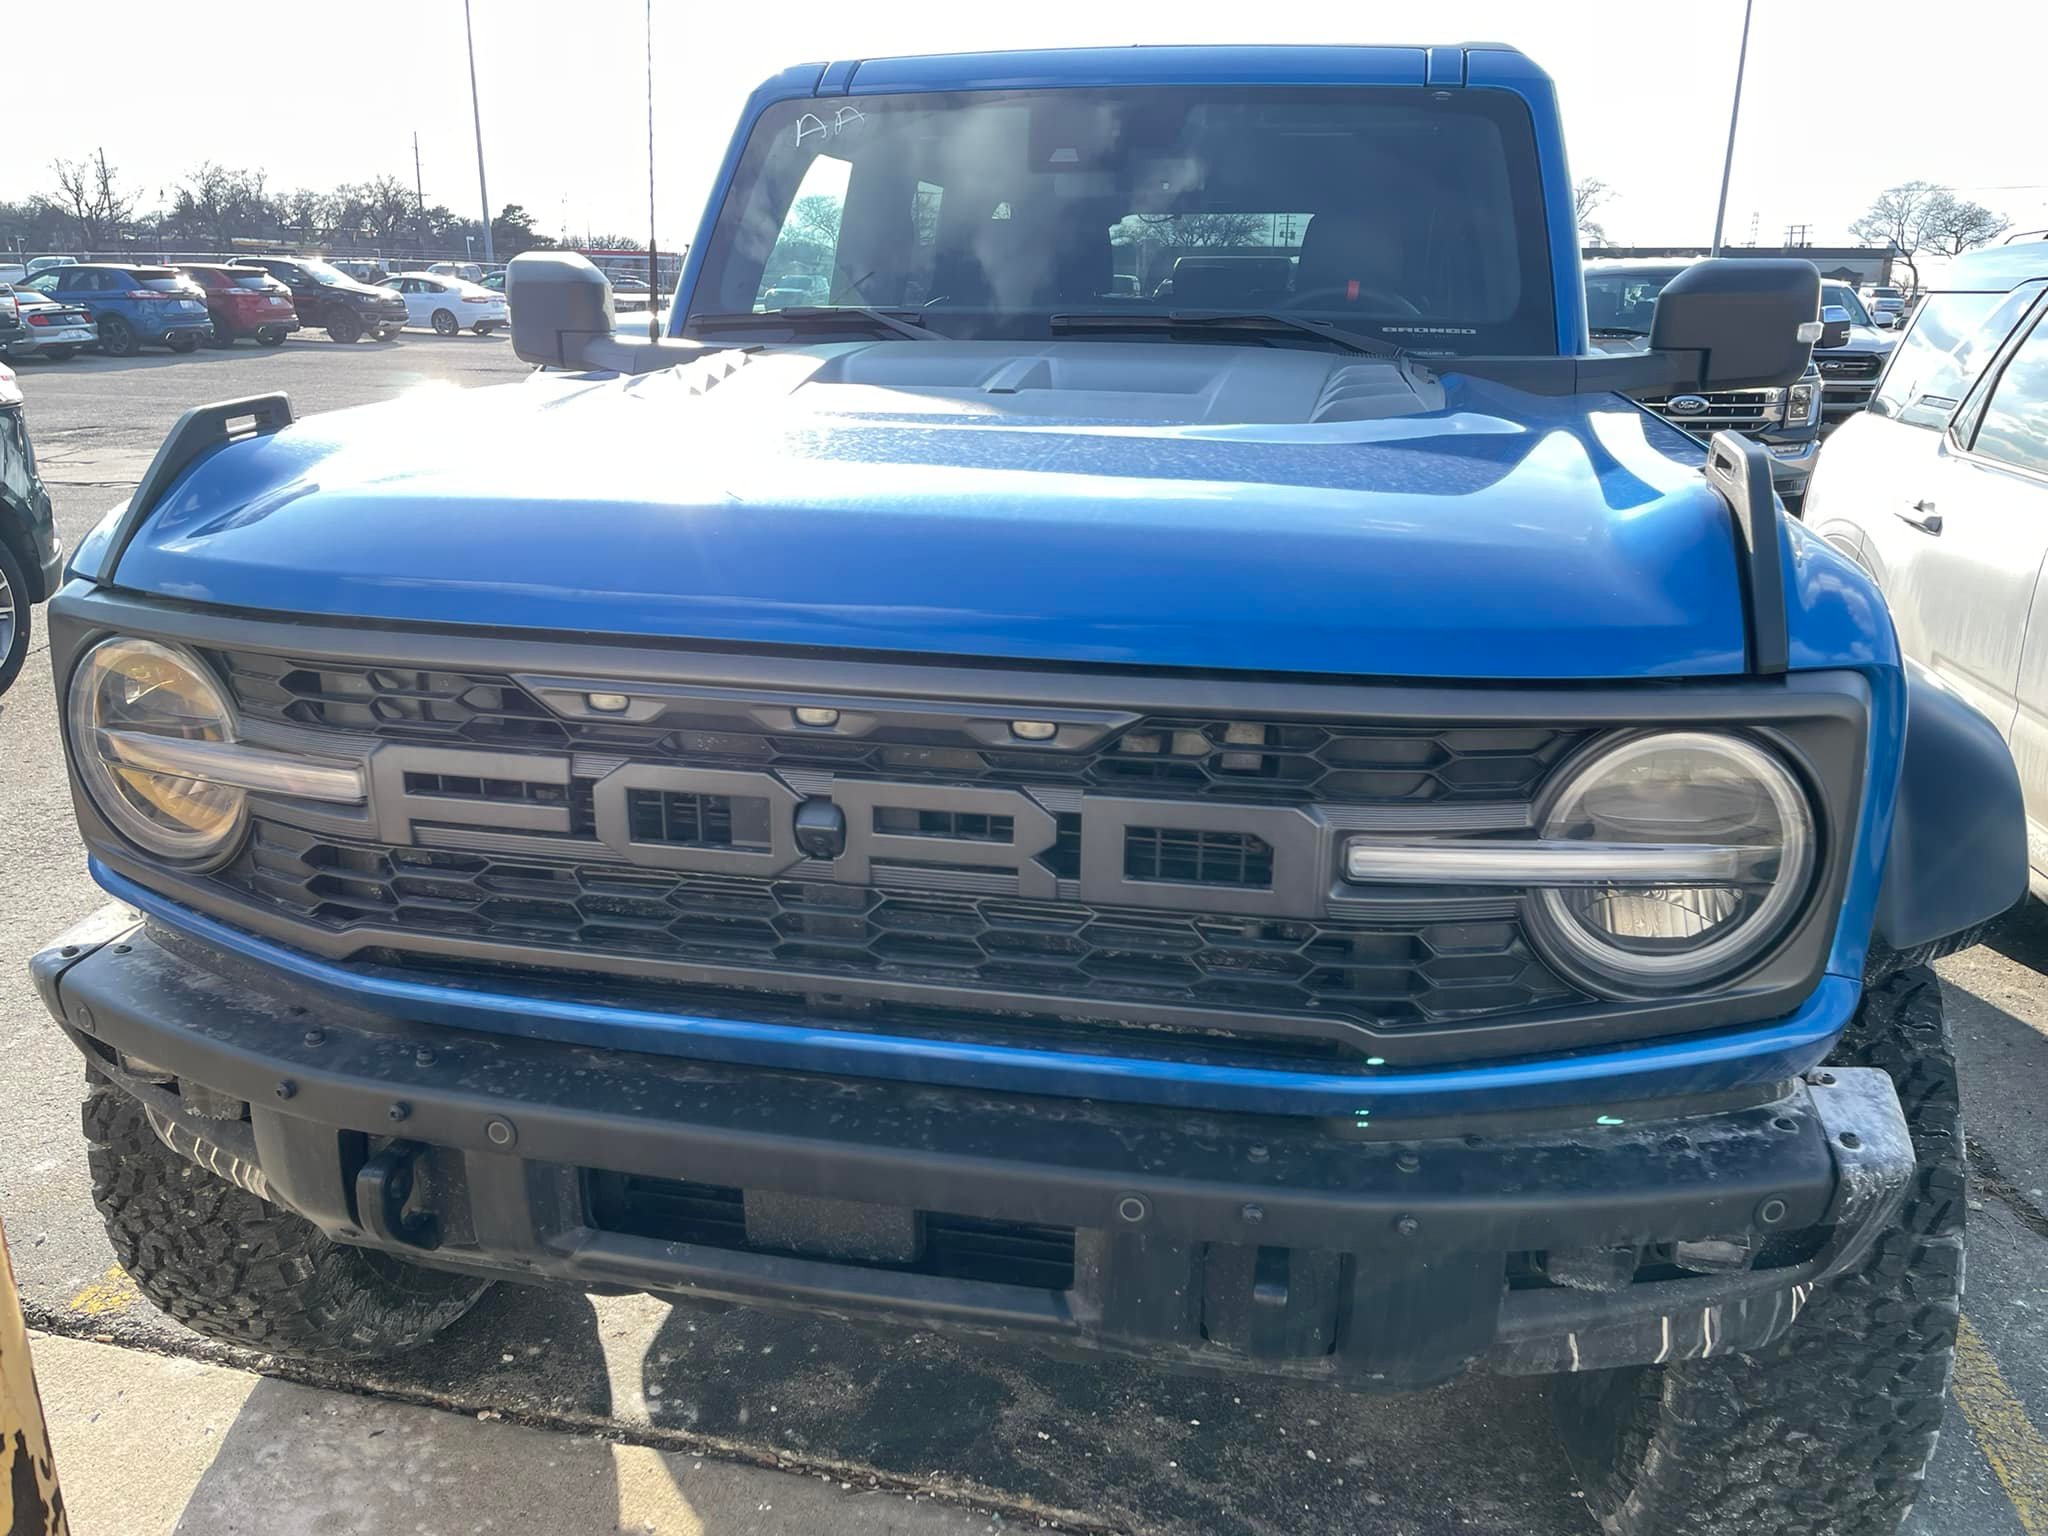 Ford Bronco Velocity Blue Raptor Bronco With MGV Interior Pics and Fly-By Video Sound Clip Velocity Blue Bronco Raptor with interior photos and engine exhaust video sound 2